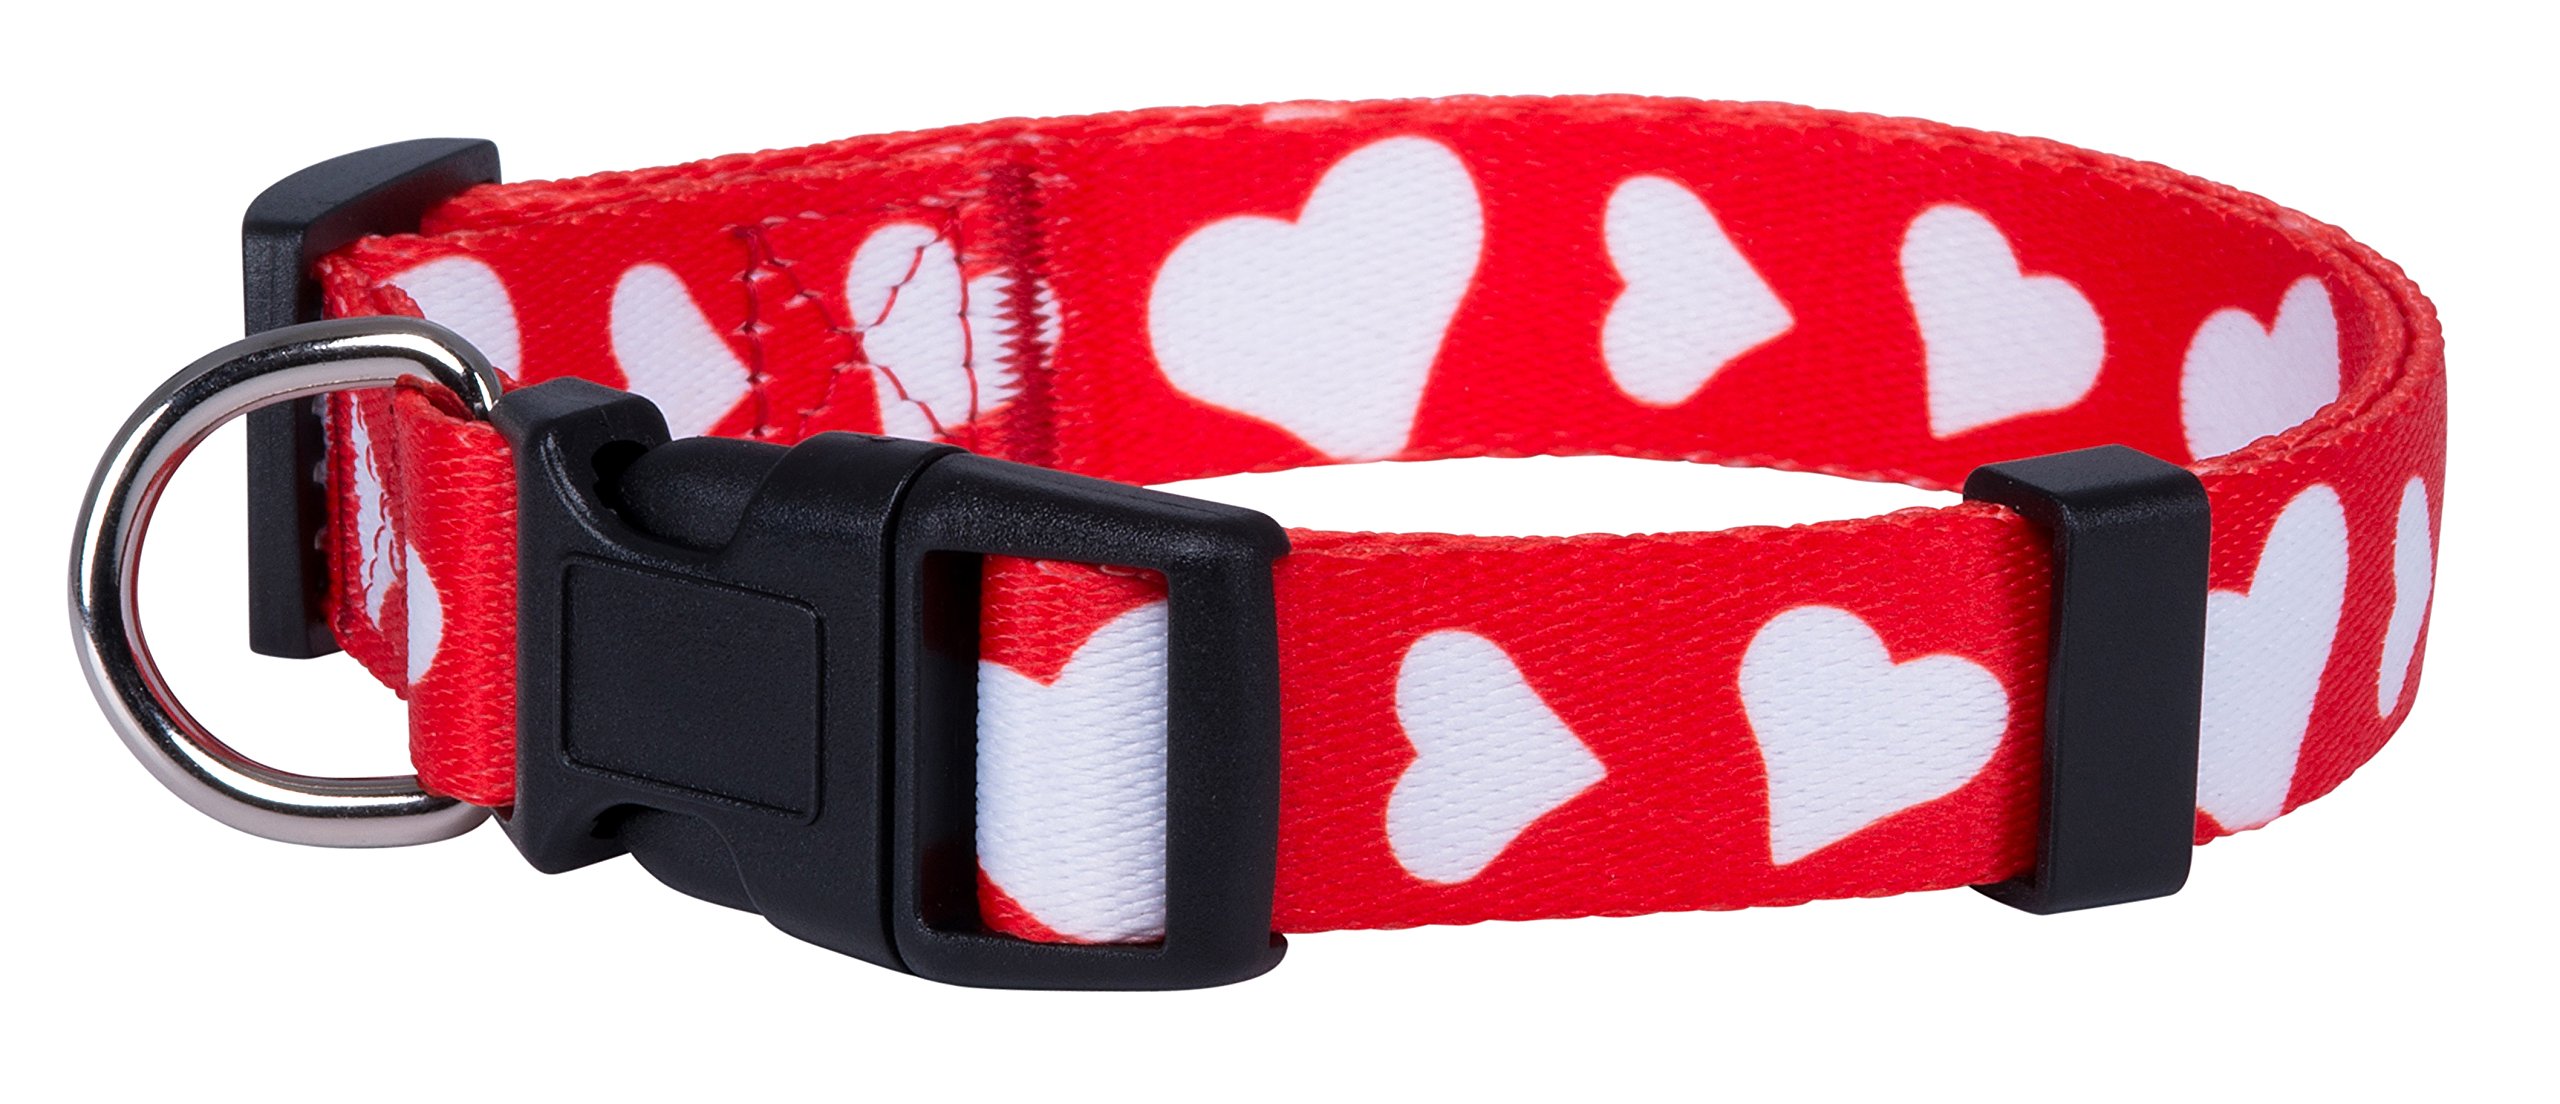 Native Pup Valentines Day Heart Dog Collar, Cute Pink Red Puppy Gift (Medium, Red Heart)